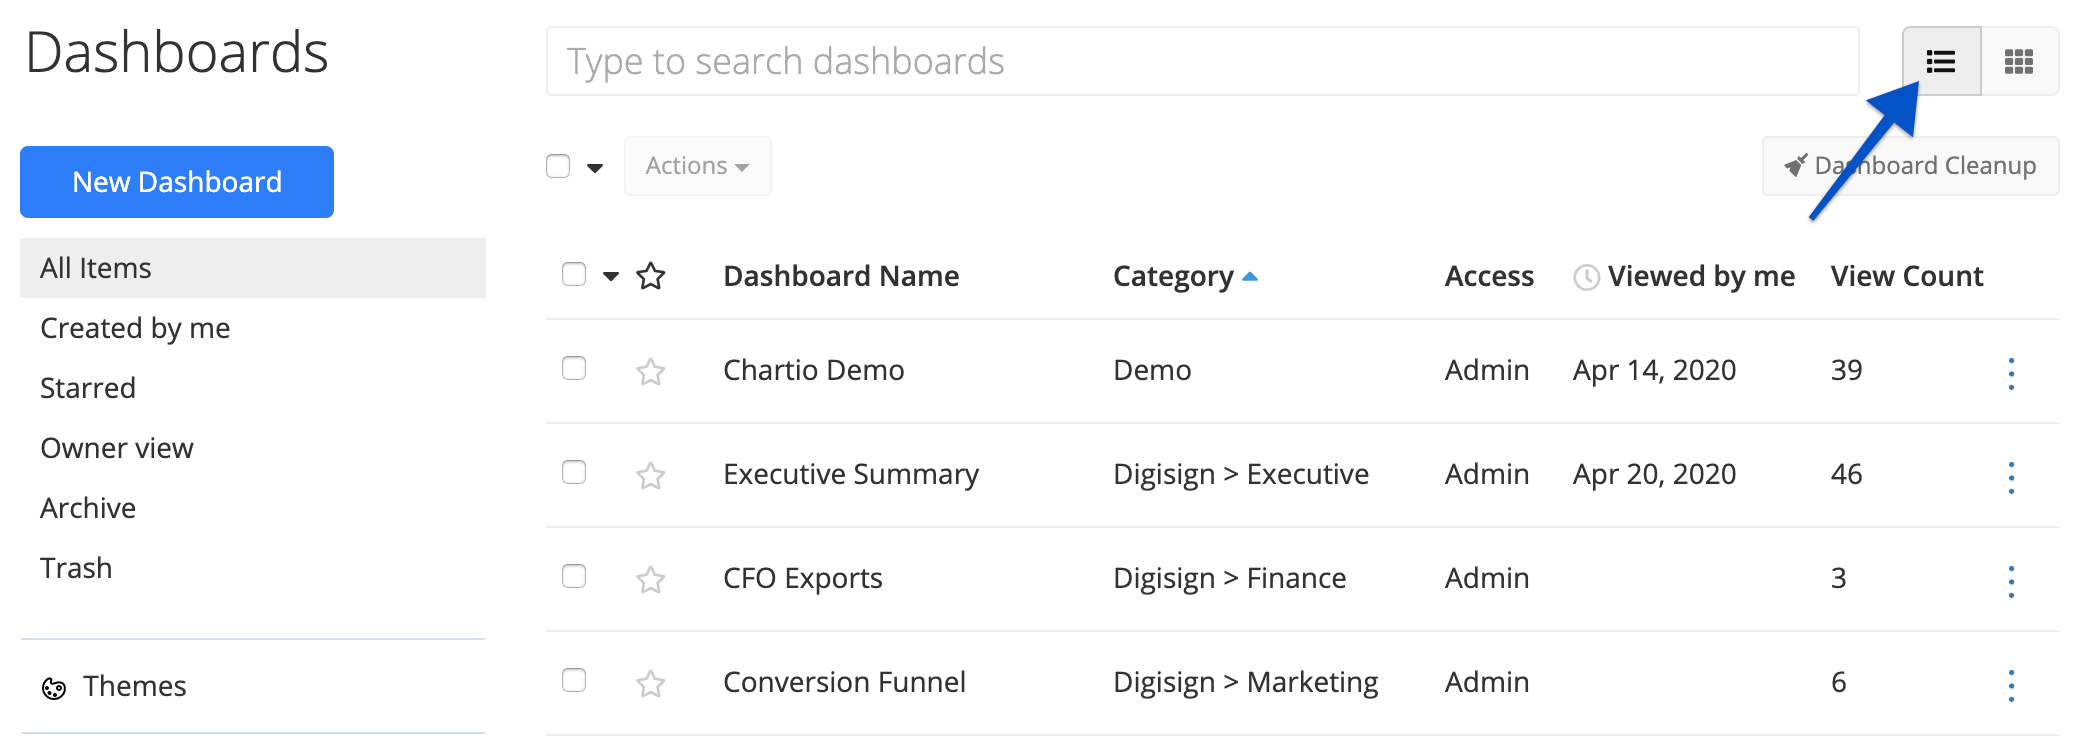 List view of dashboards